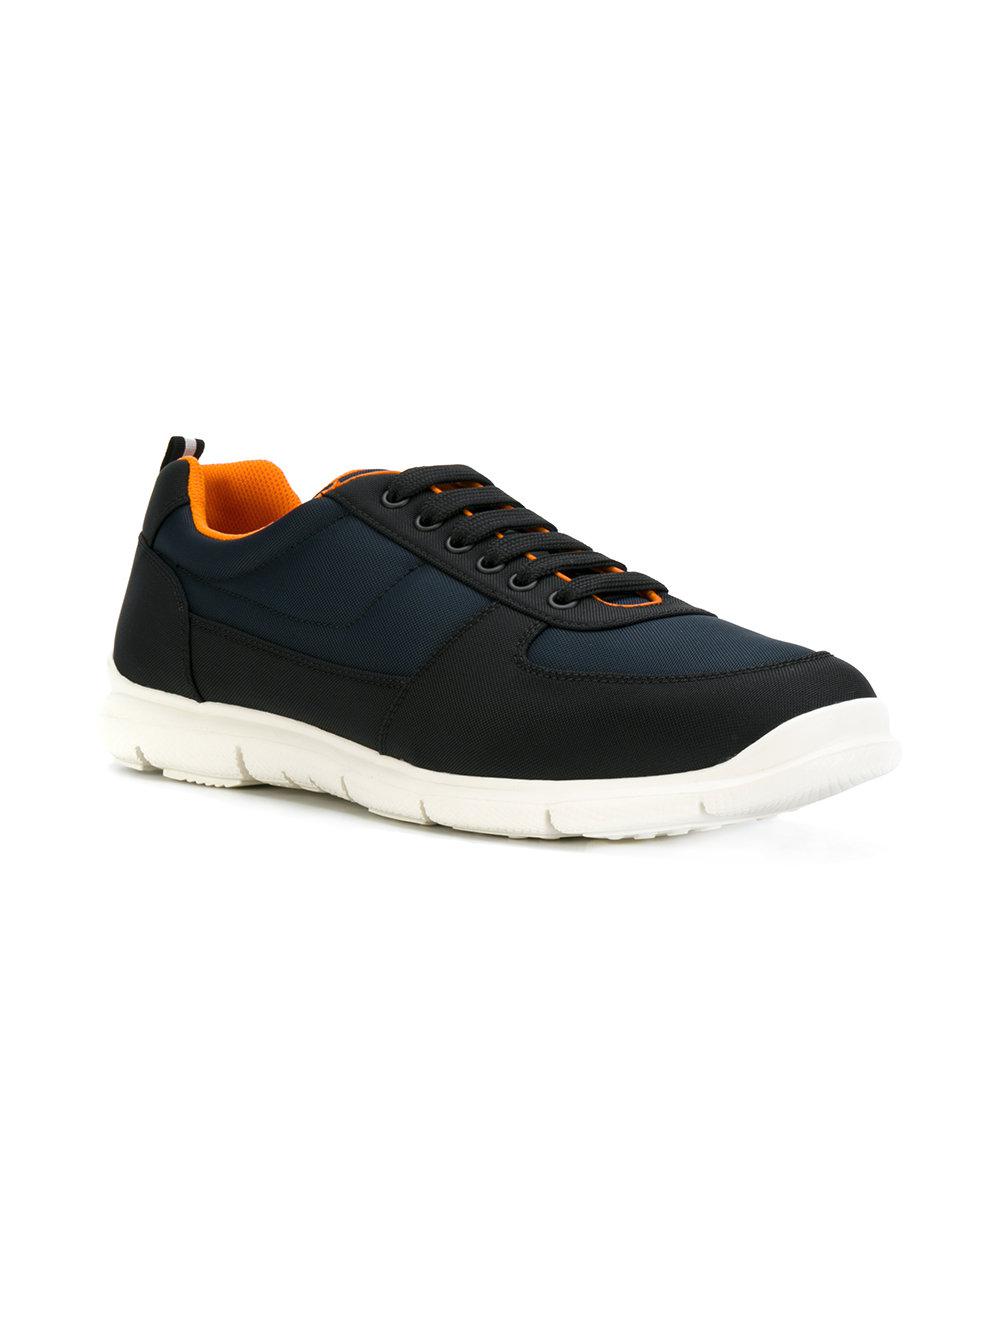 Lyst - Car Shoe Lace-up Sneakers in Blue for Men